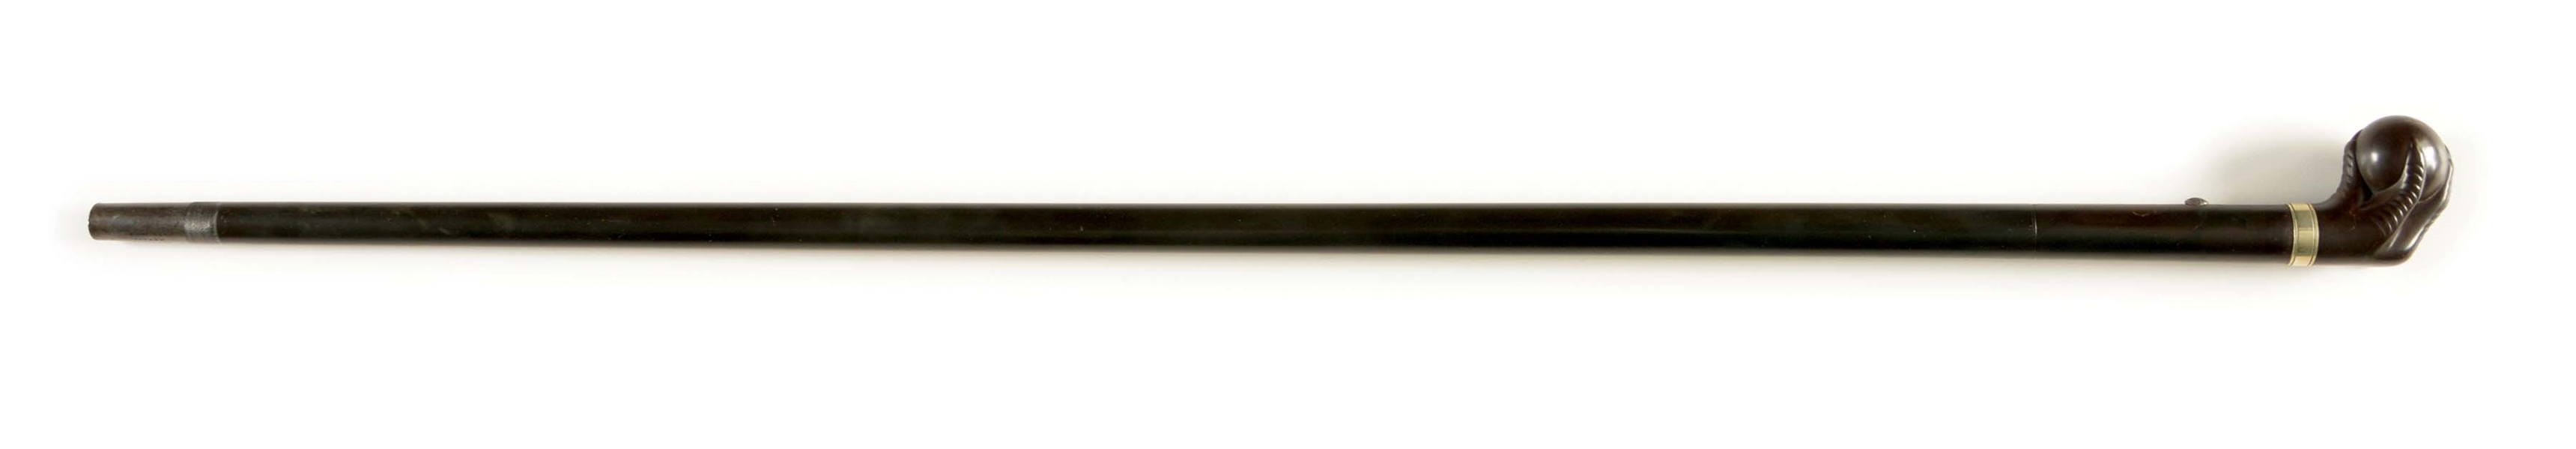 (A) A VERY RARE REMINGTON PERCUSSION RIFLE CANE WITH THE DESIRABLE EAGLE CLAW AND BALL GRIP.